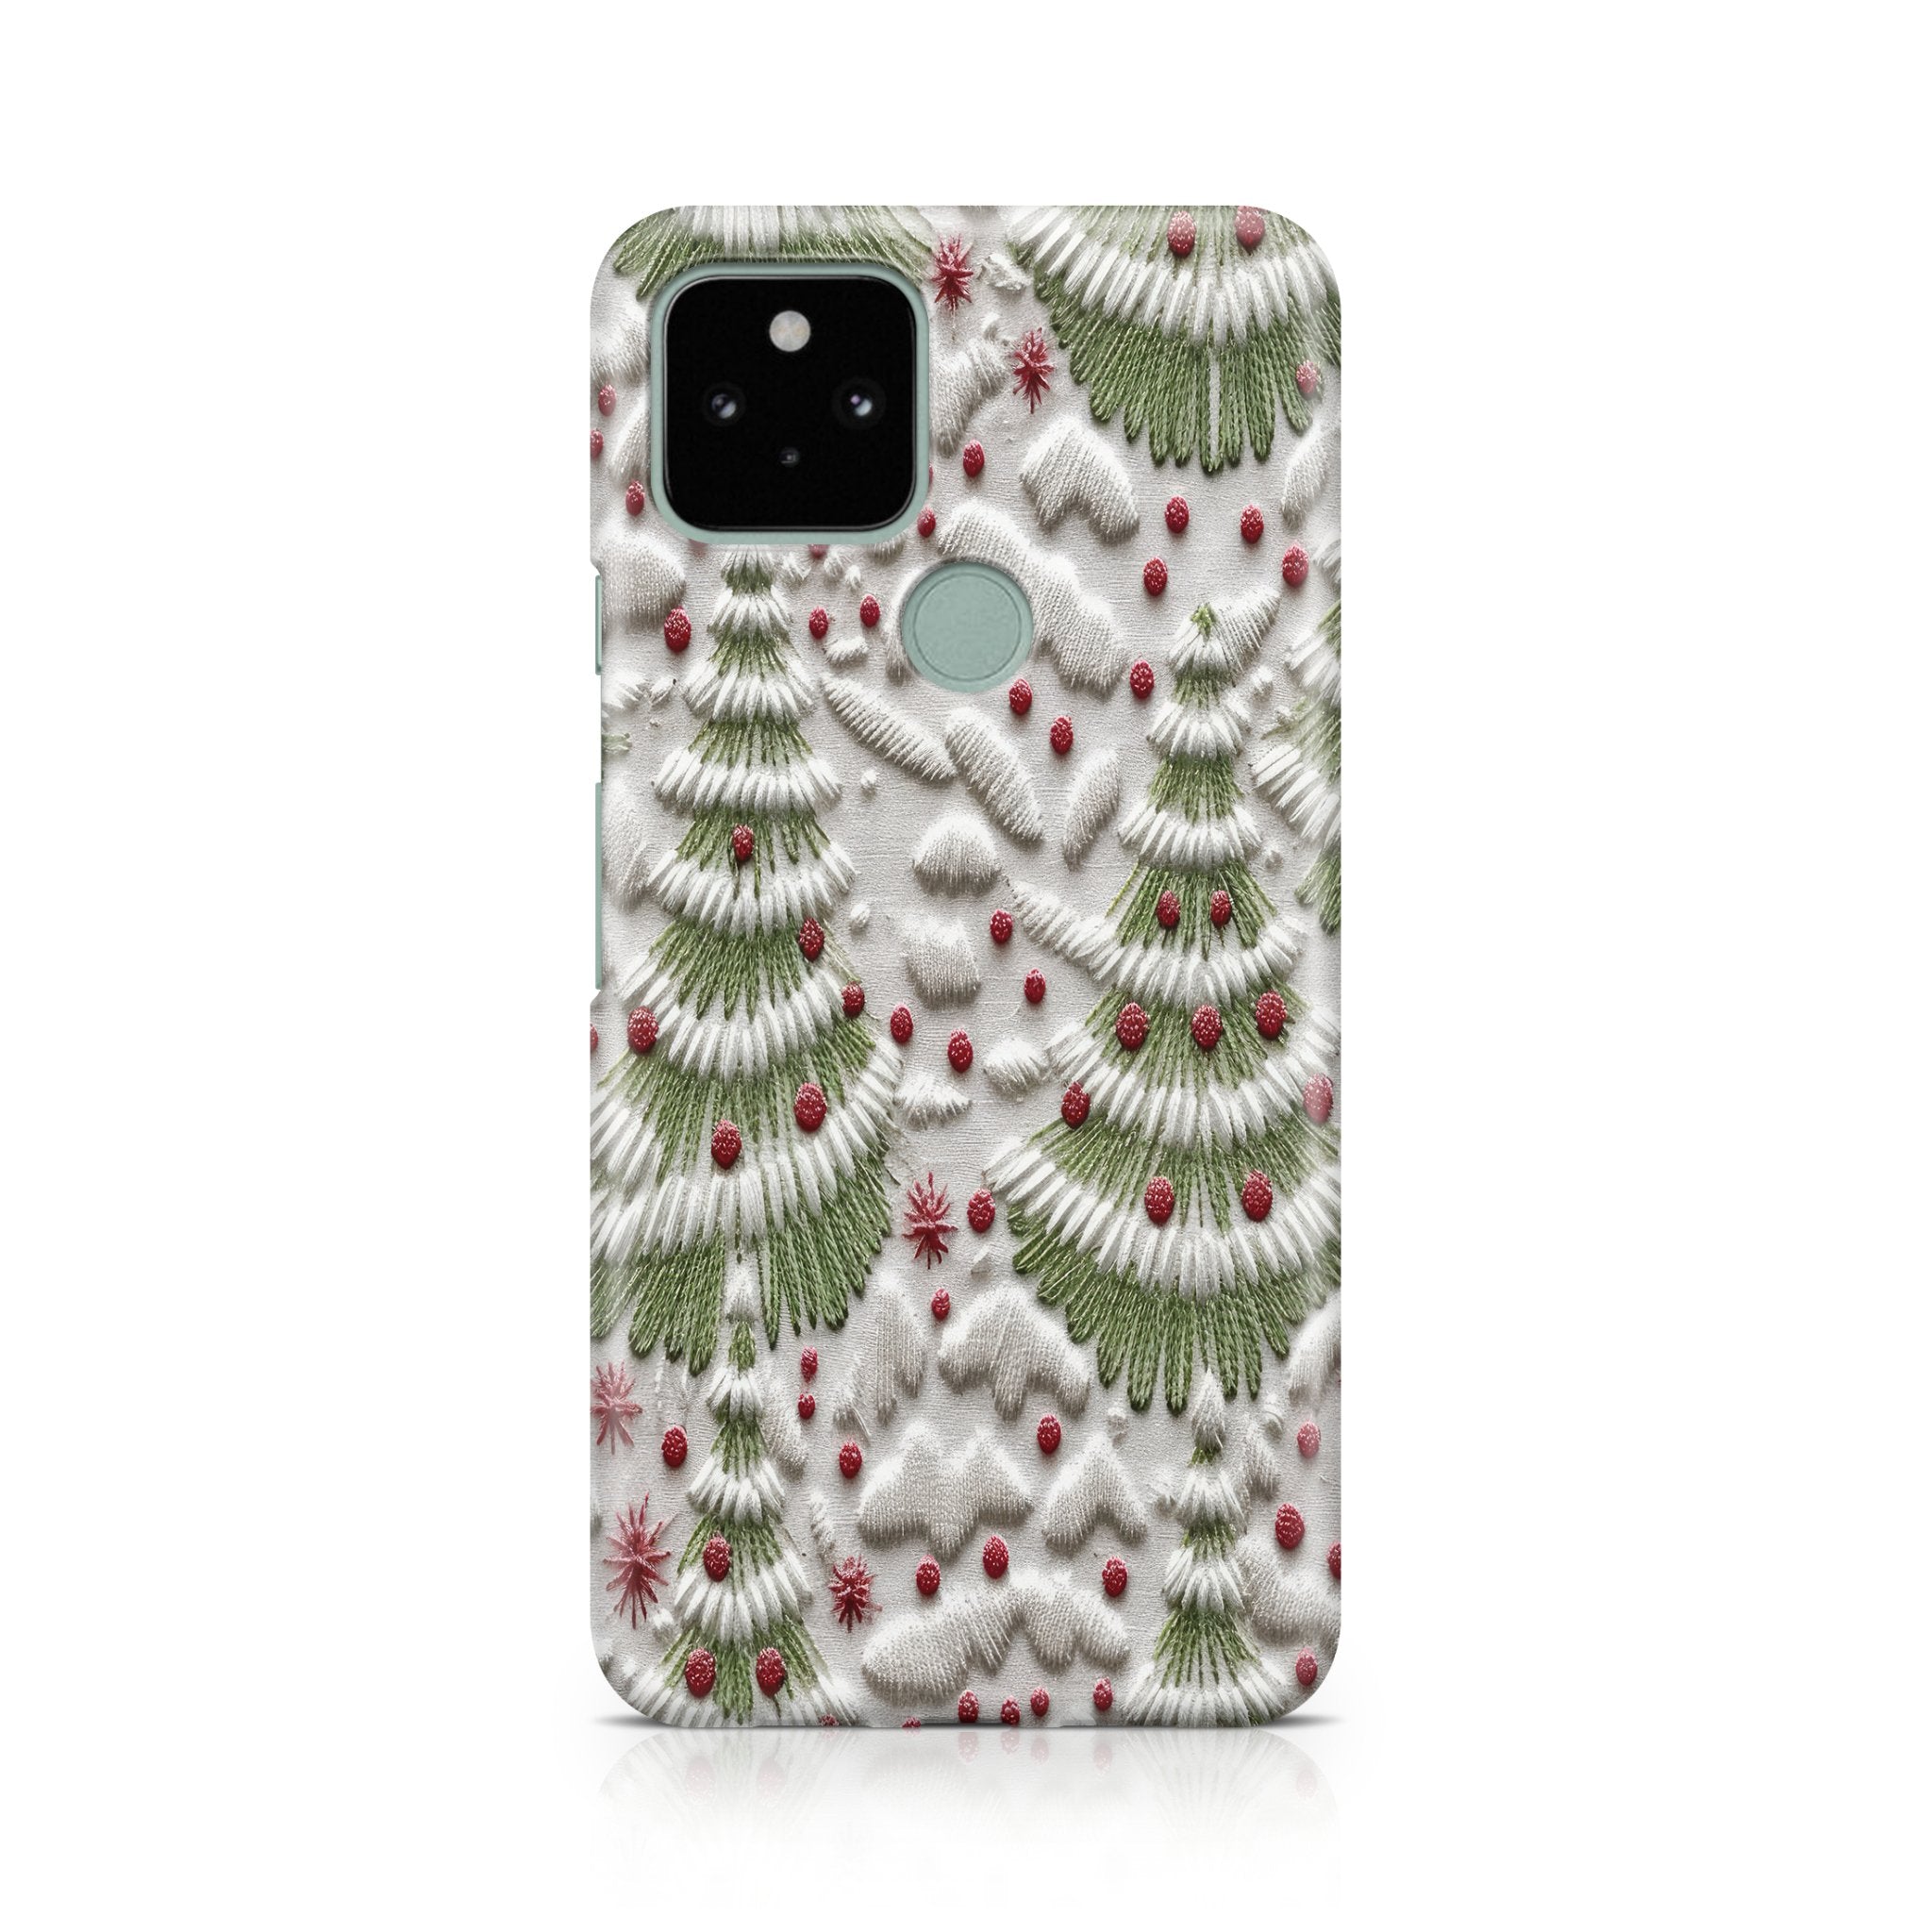 Winter Berries - Google phone case designs by CaseSwagger